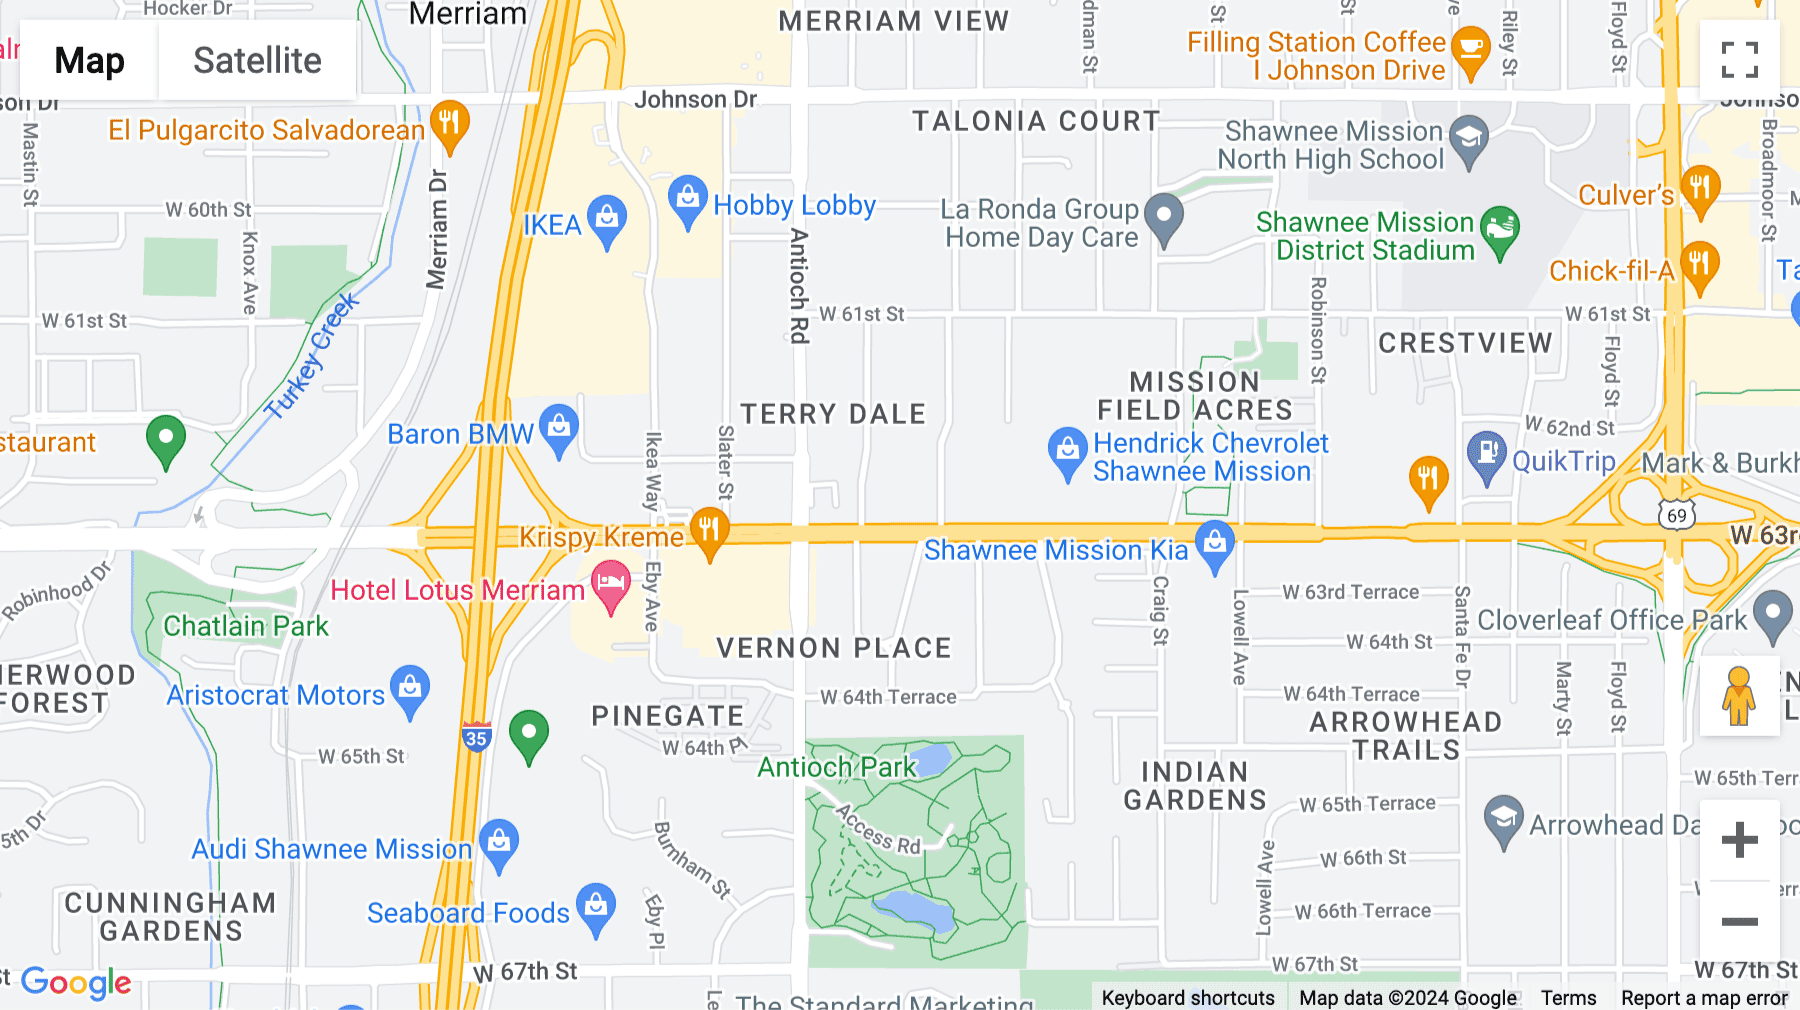 Click for interative map of 8500 Shawnee Mission Parkway, Suite 150, Merriam, KS, Mission